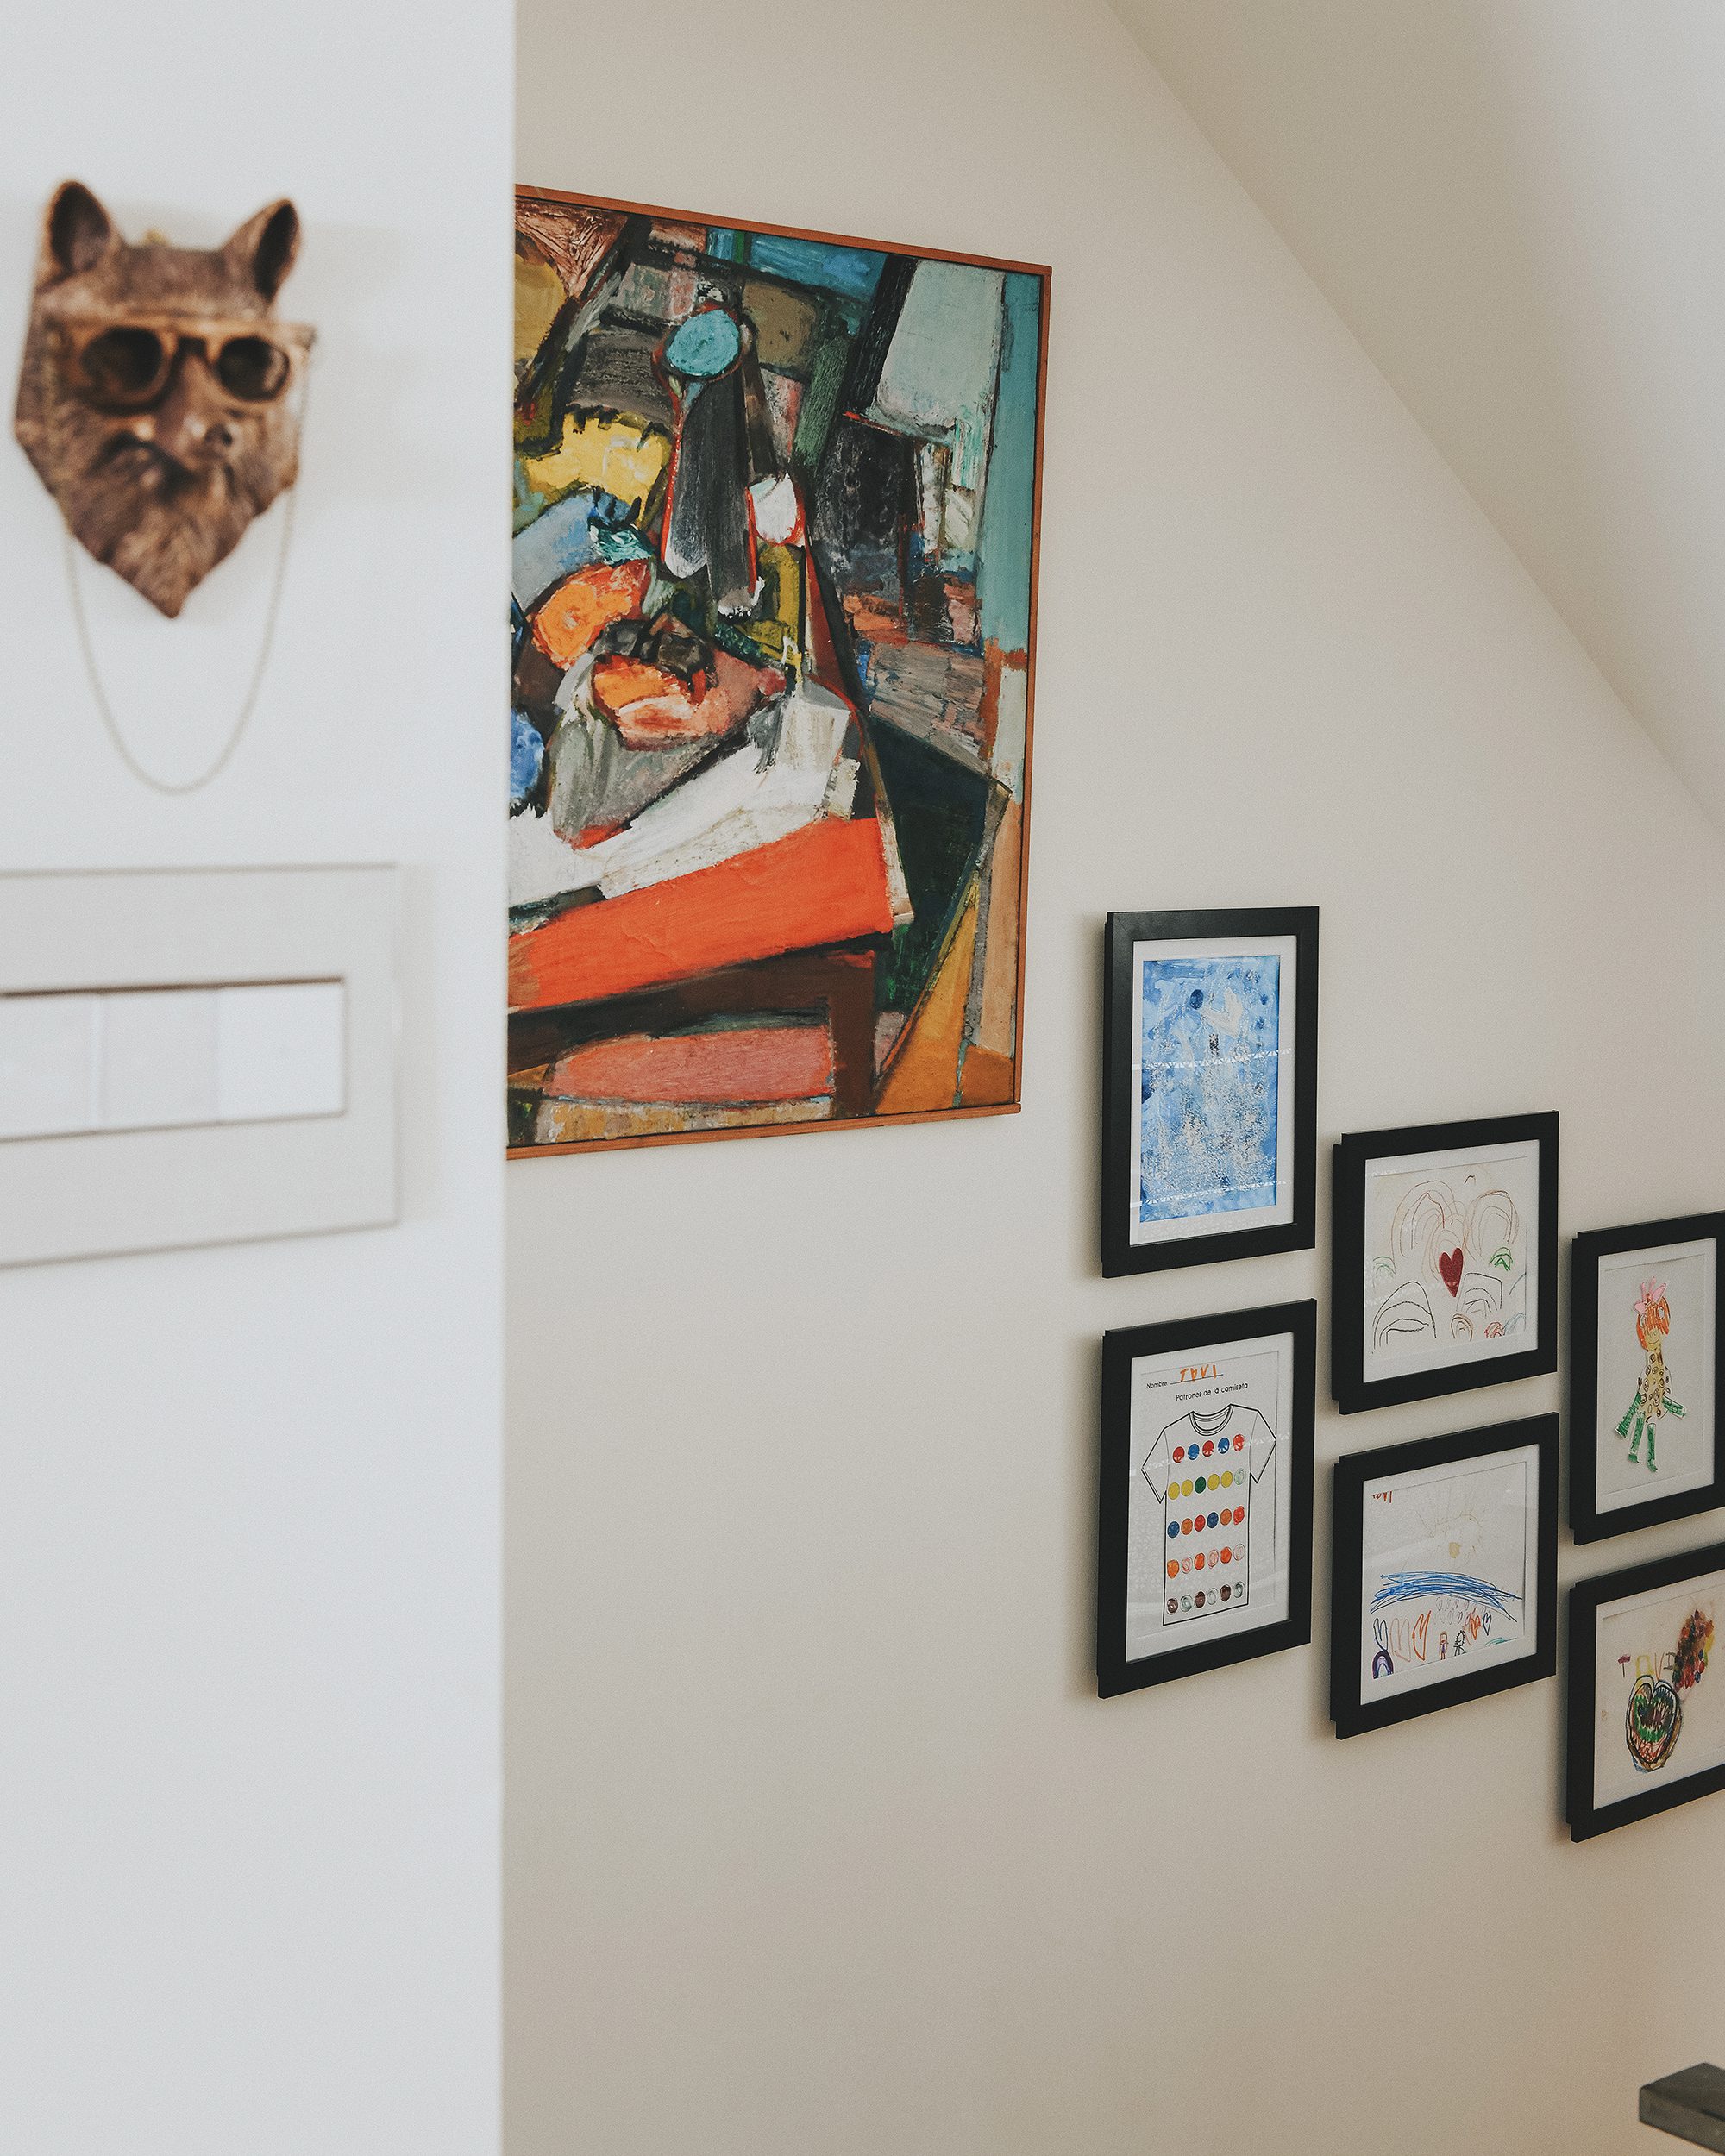 Hallway of frames with vintage painting and kids' art  | via Yellow Brick Home